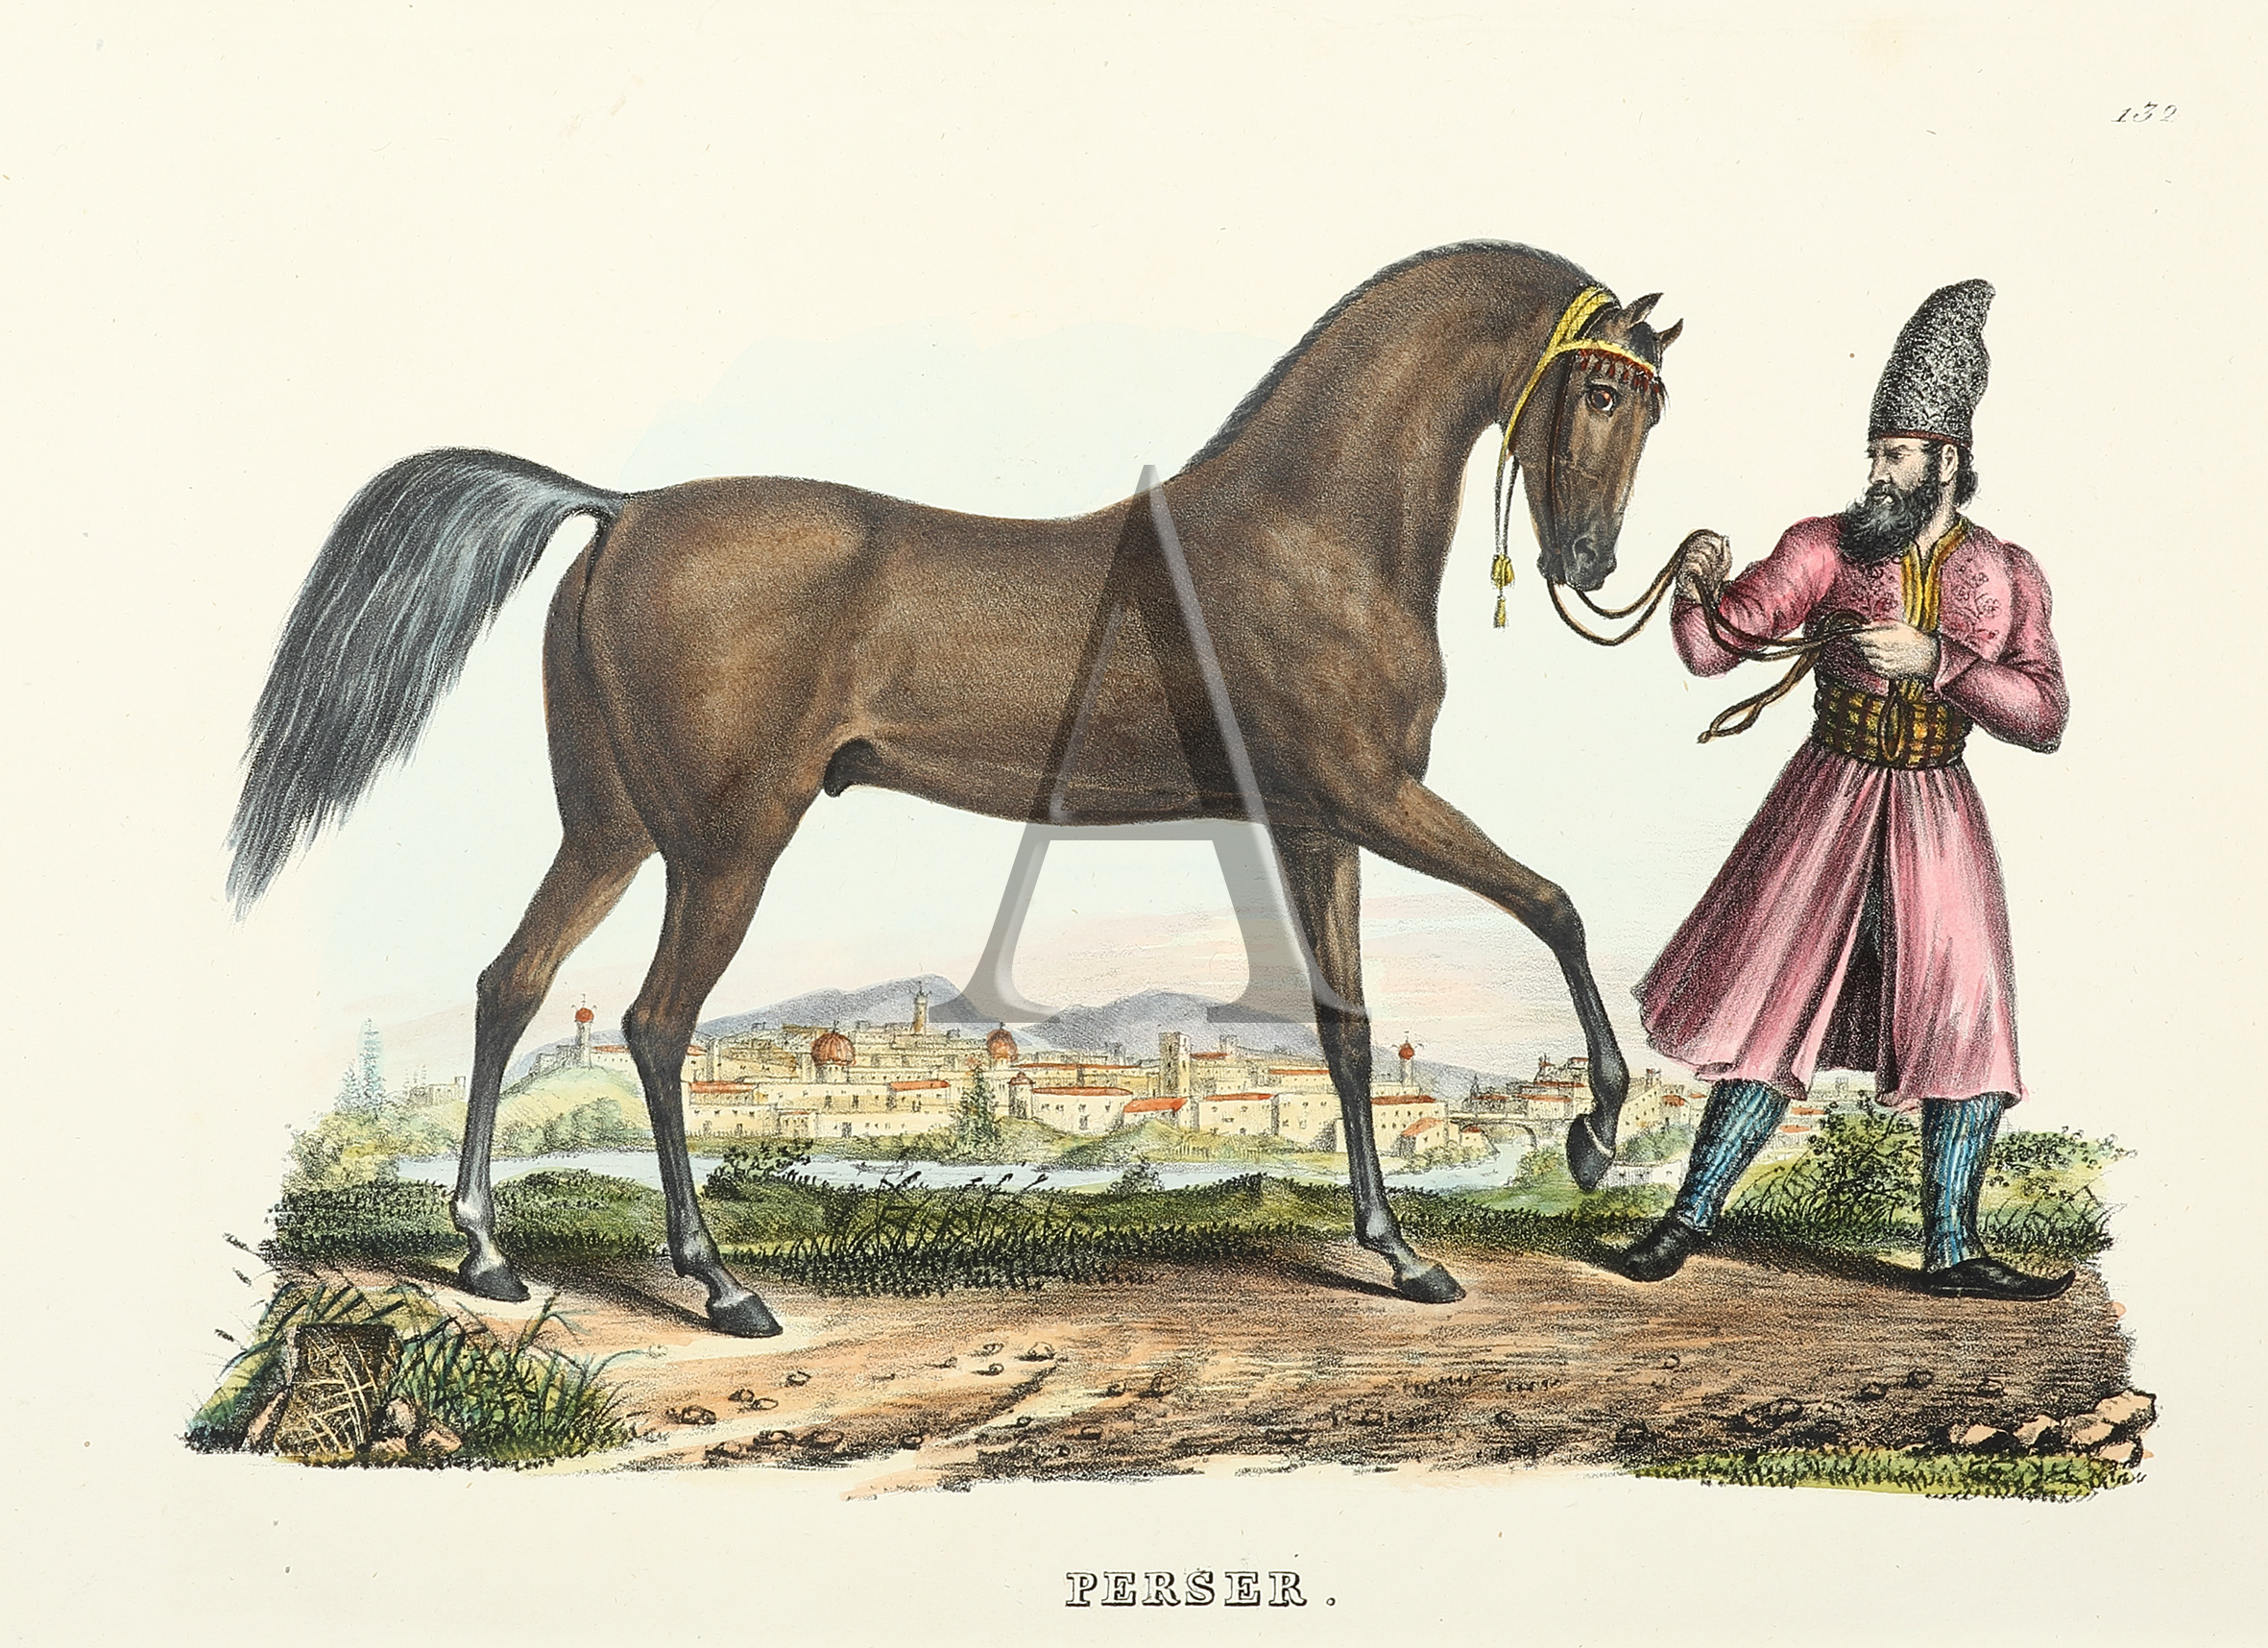 Perser. - Antique Print from 1824